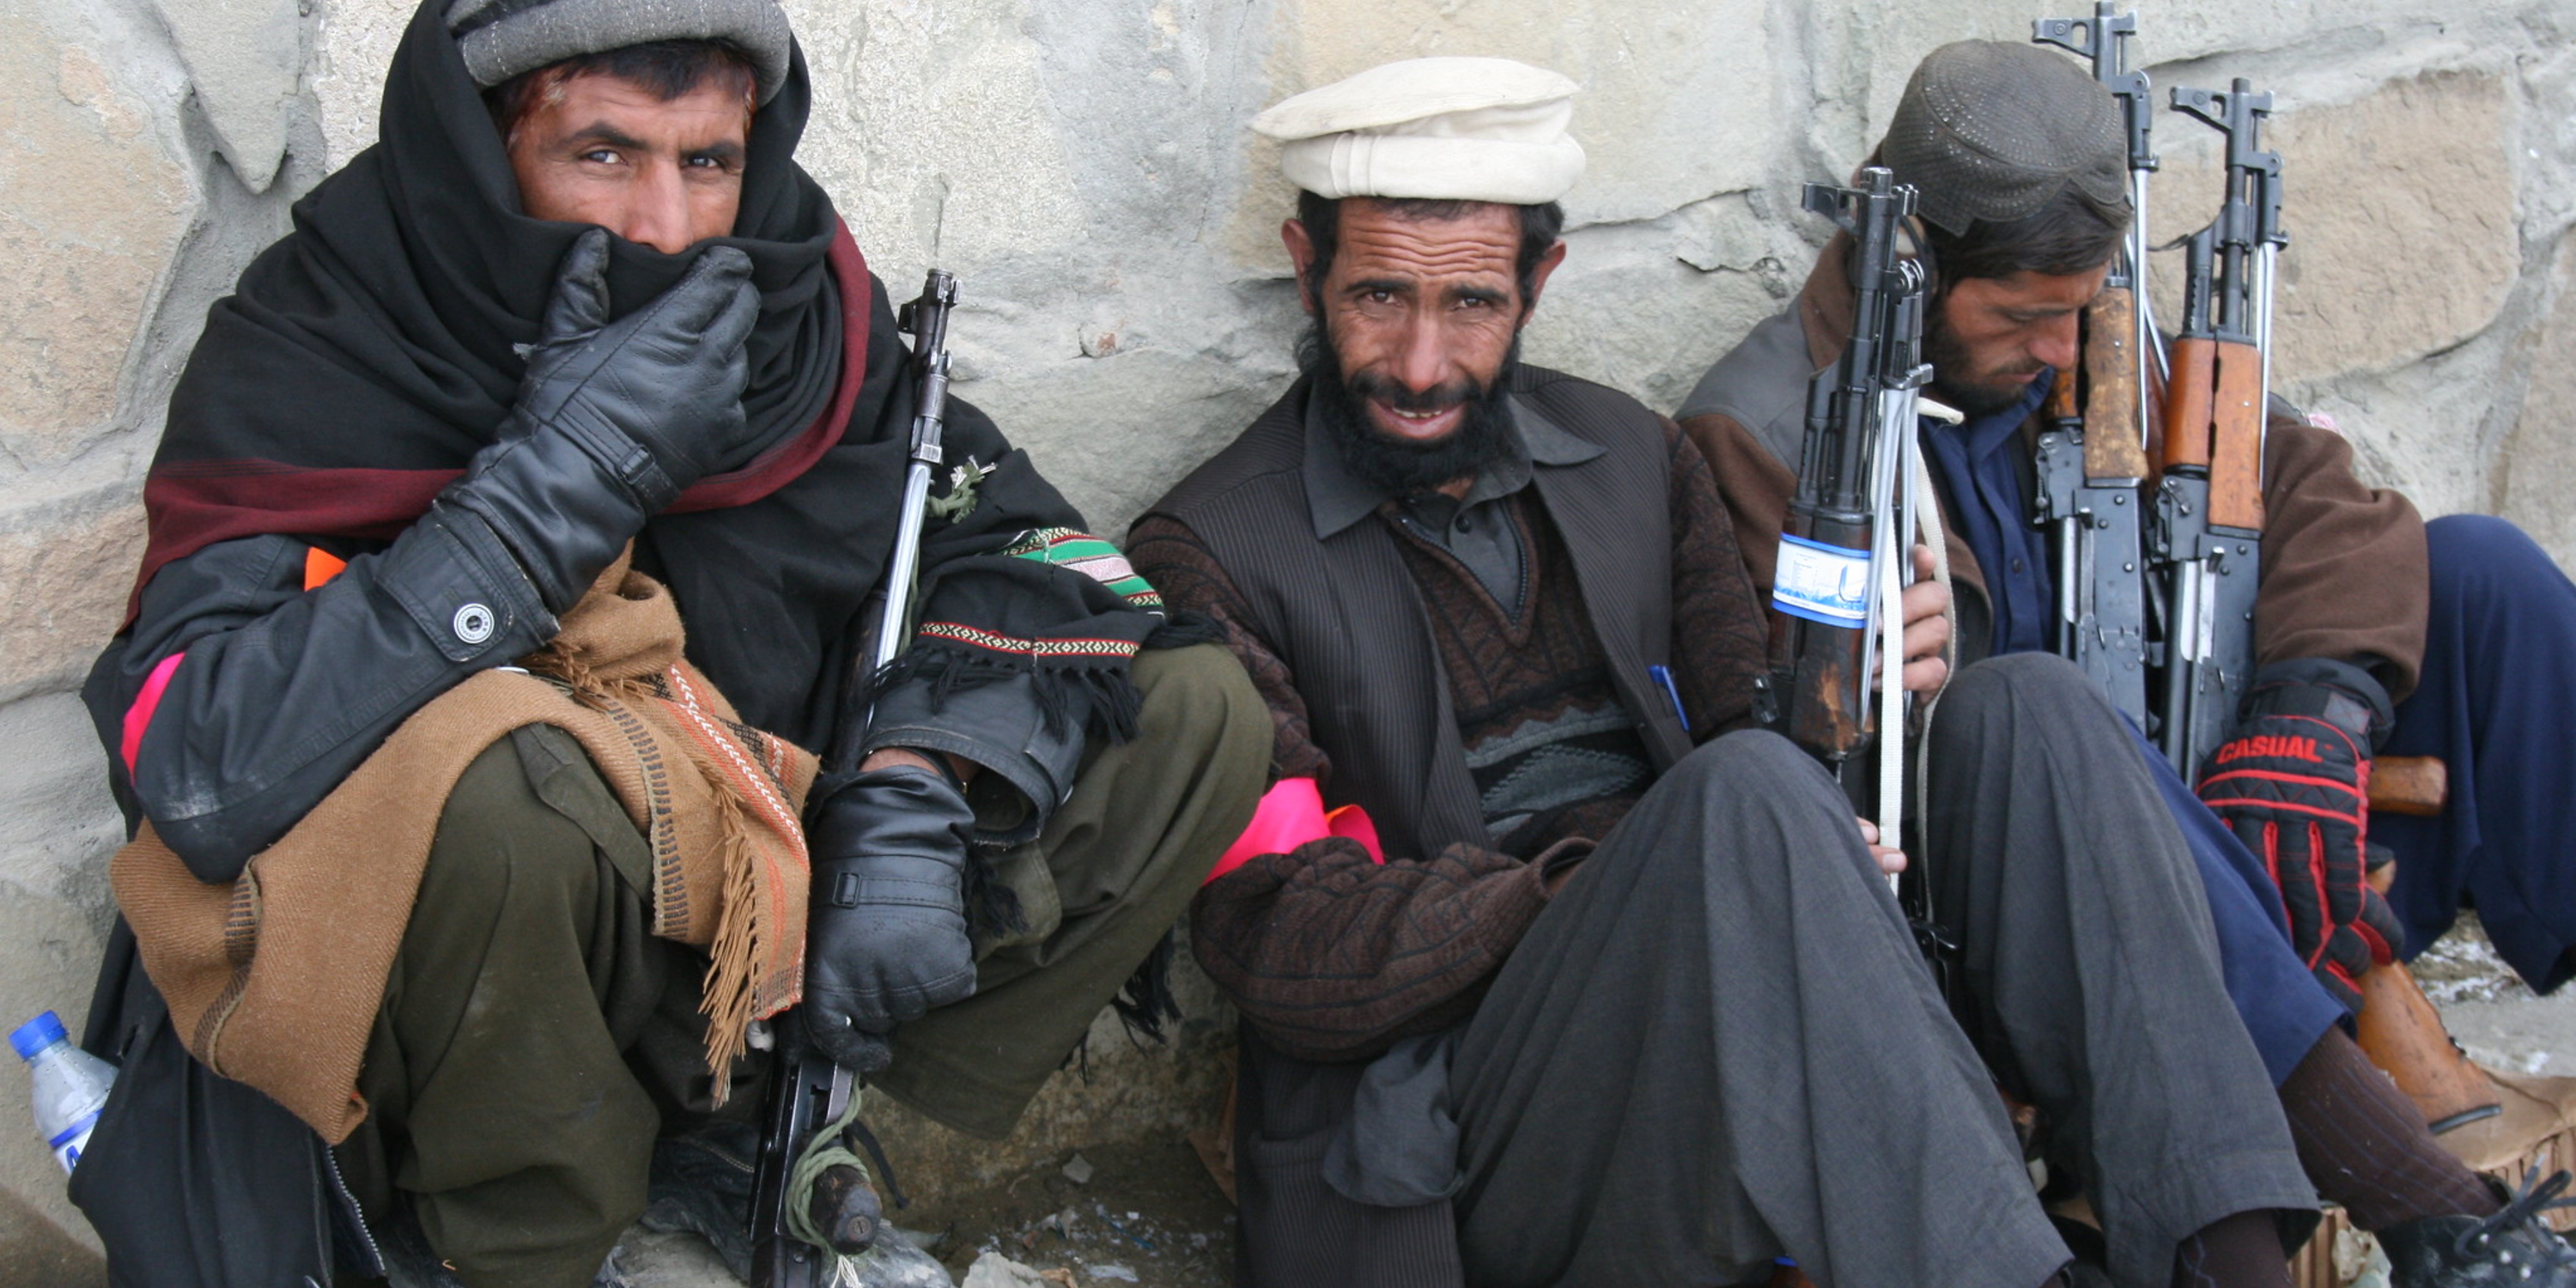 Three Afghan police trainees, sitting on ground with guns